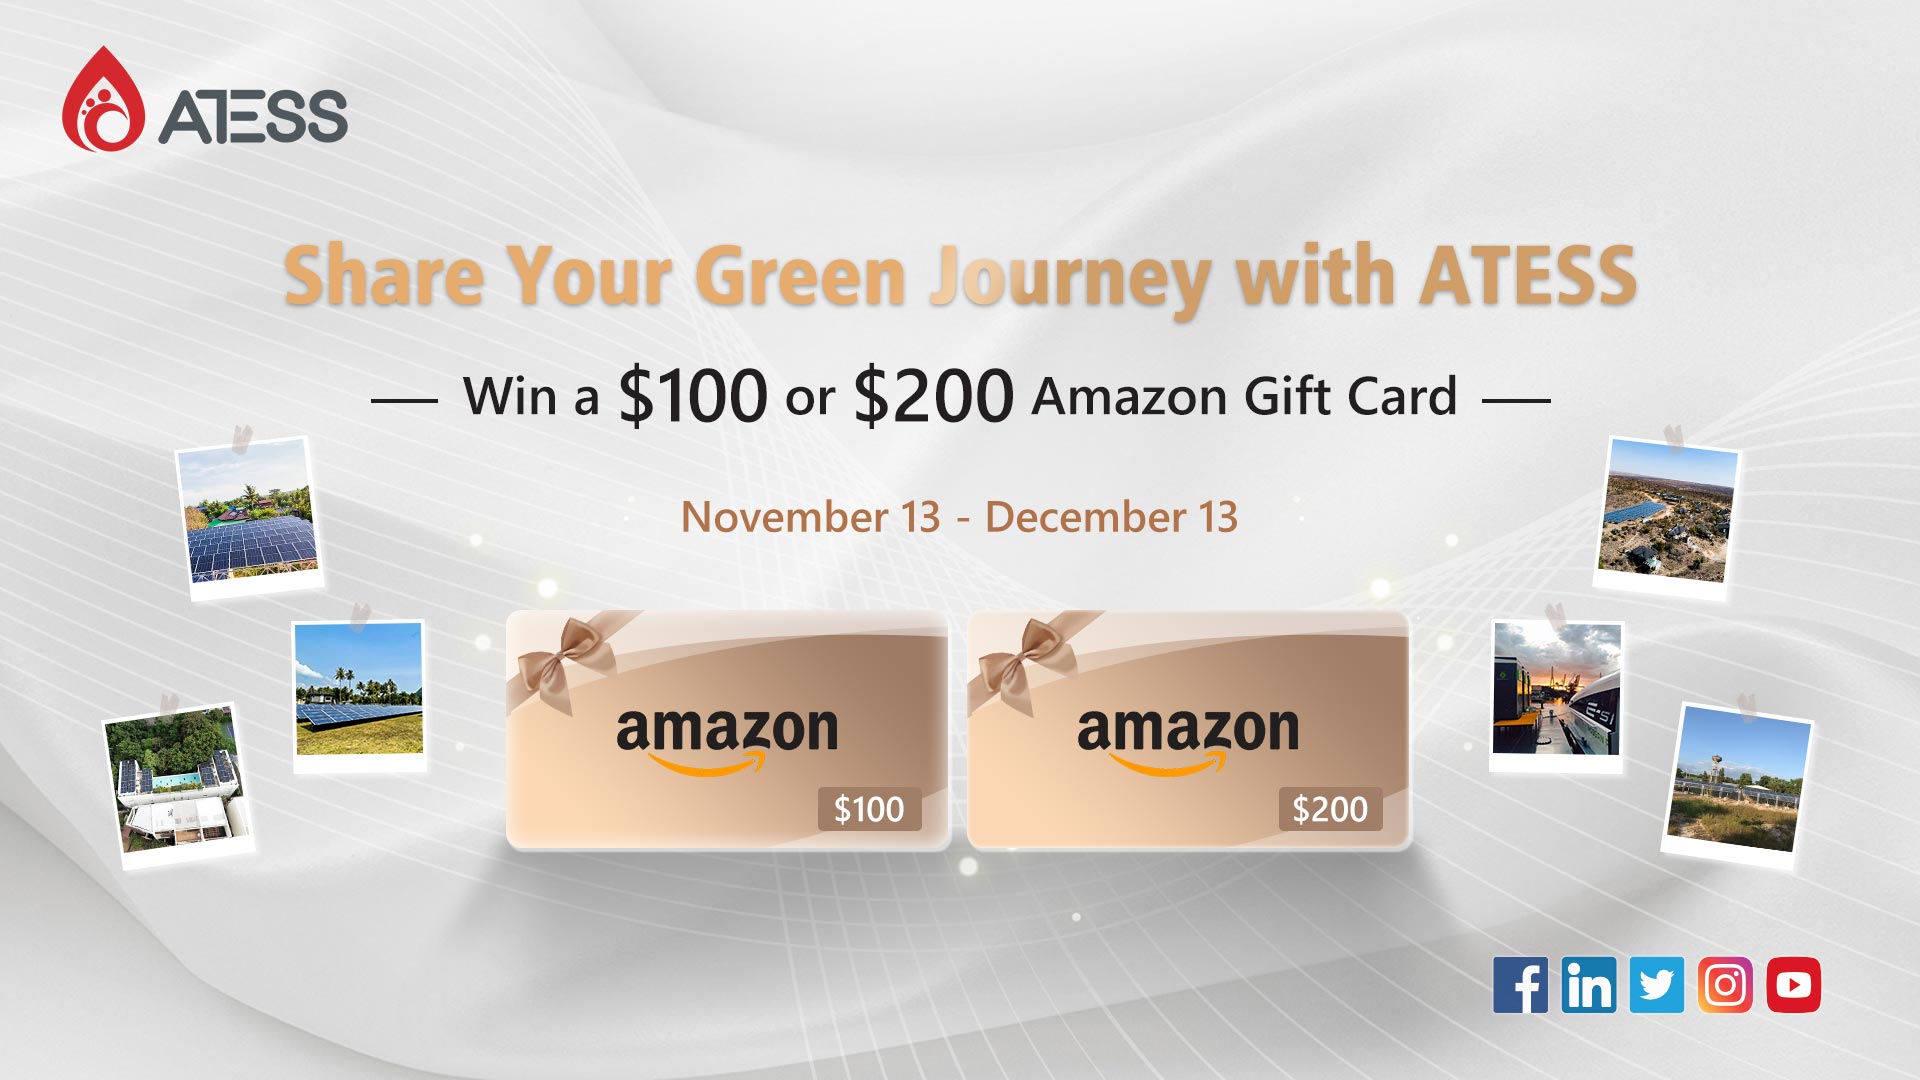 Share Your Green Journey with ATESS